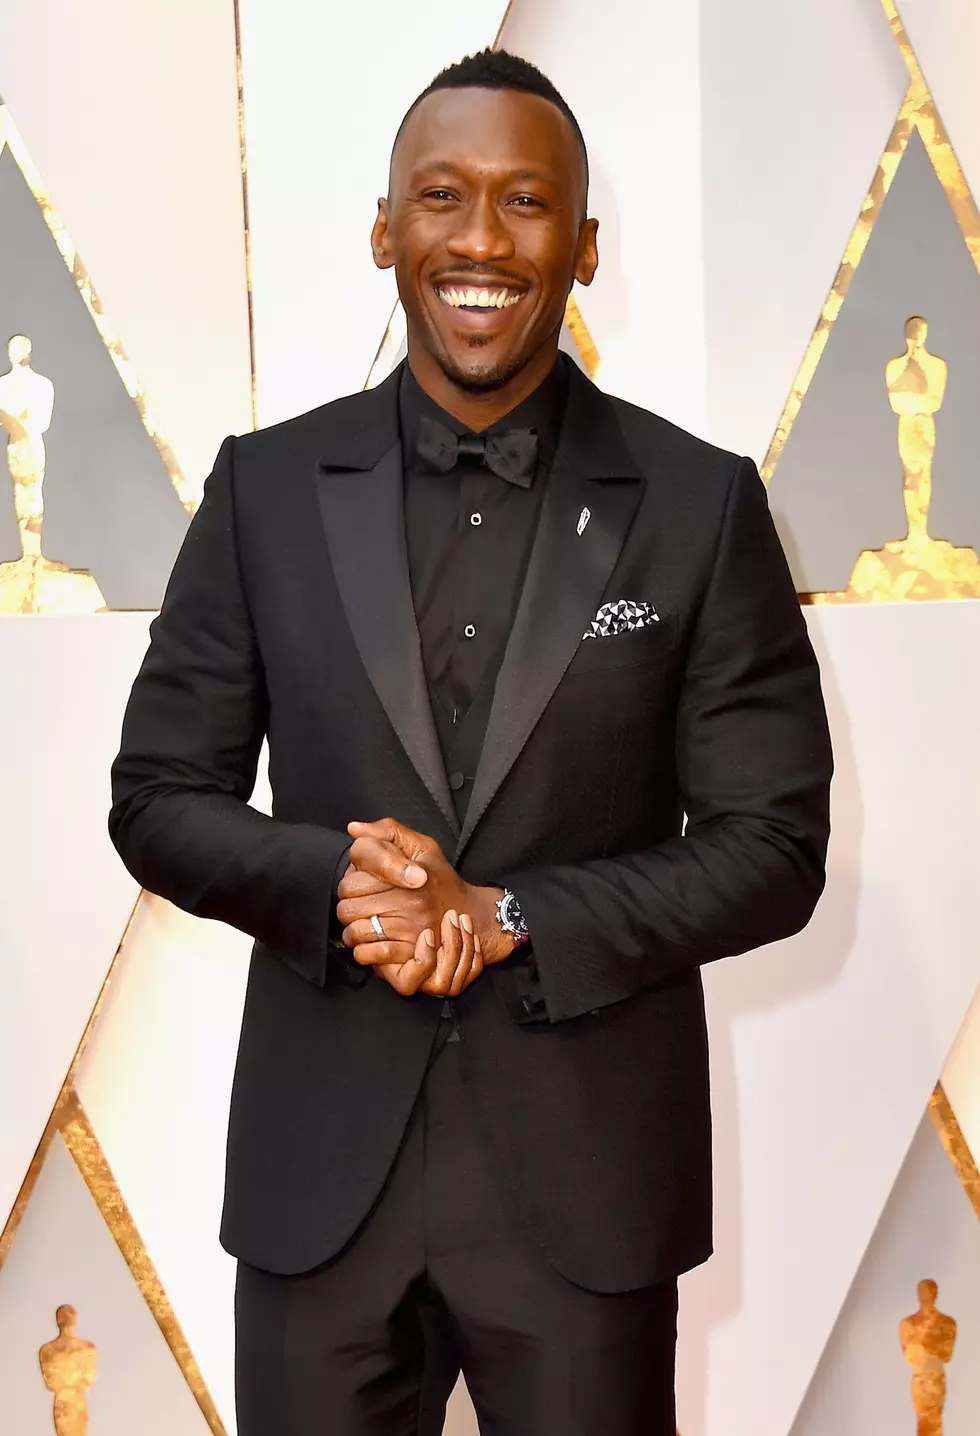 Mahershala Ali Is a New Dad and a Best Supporting Actor Winner at the 2017 Oscars